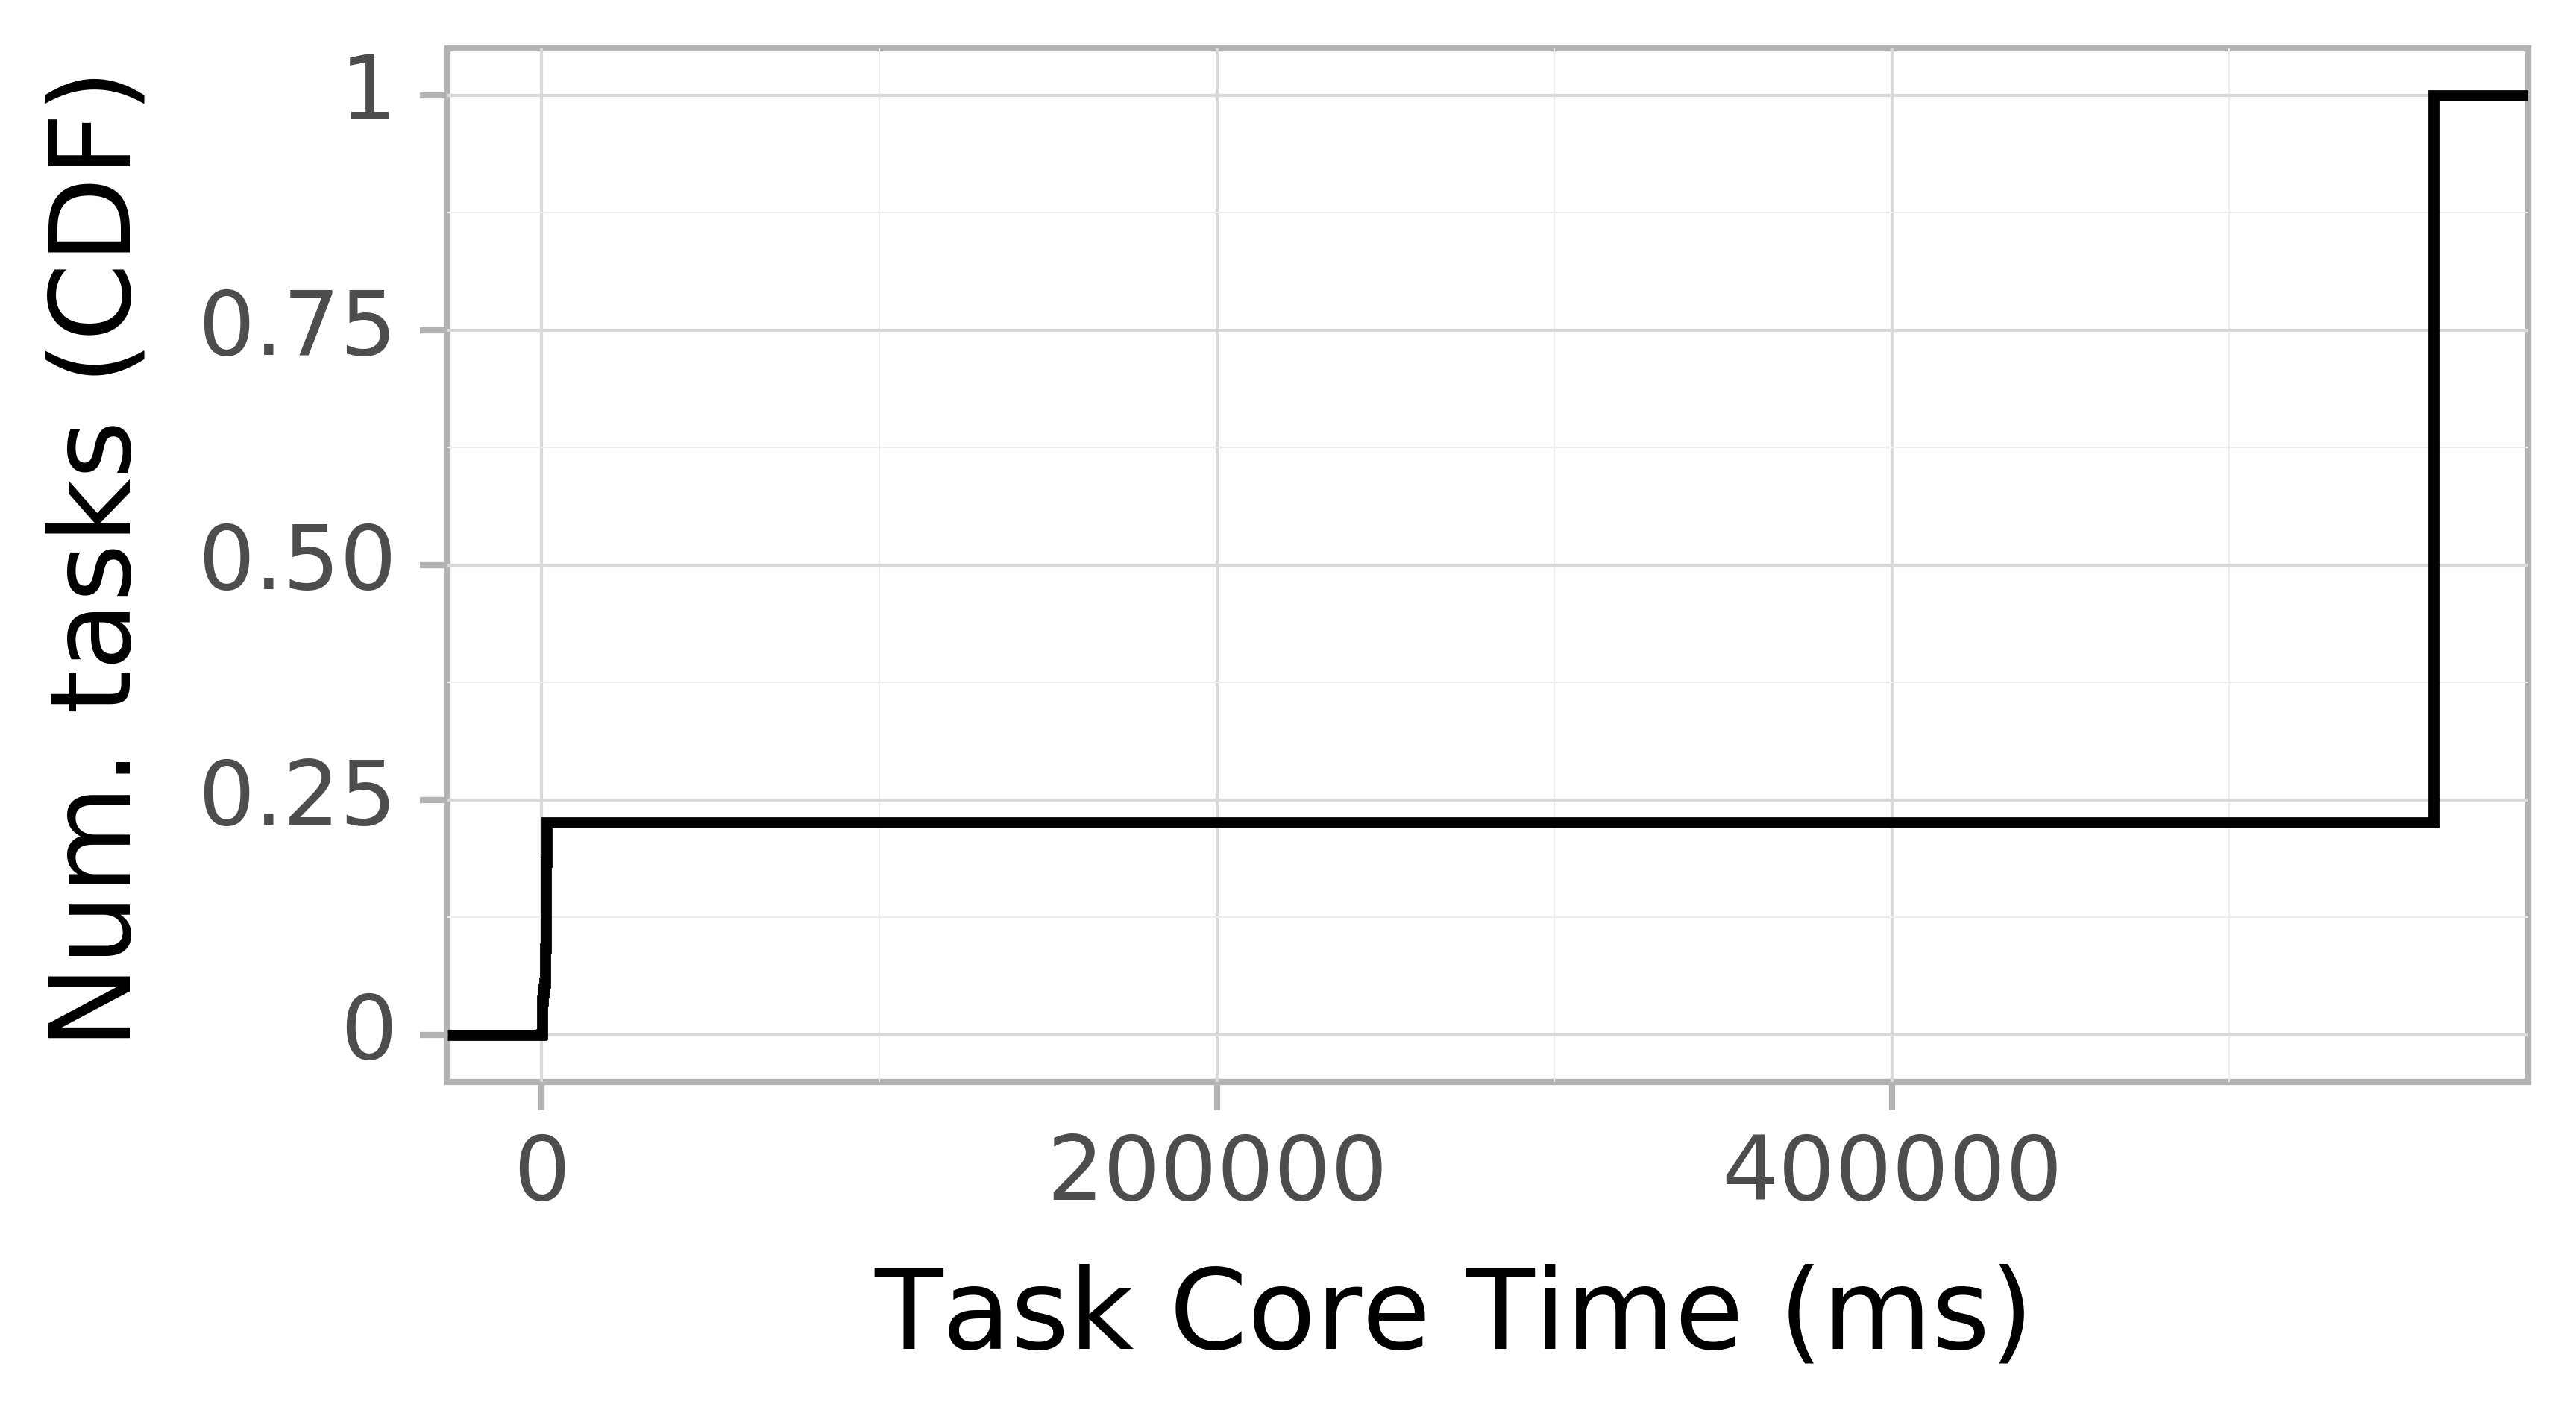 task resource time CDF graph for the workflowhub_montage_ti01-971107n_degree-4-0_osg_schema-0-2_montage-4-0-osg-run009 trace.